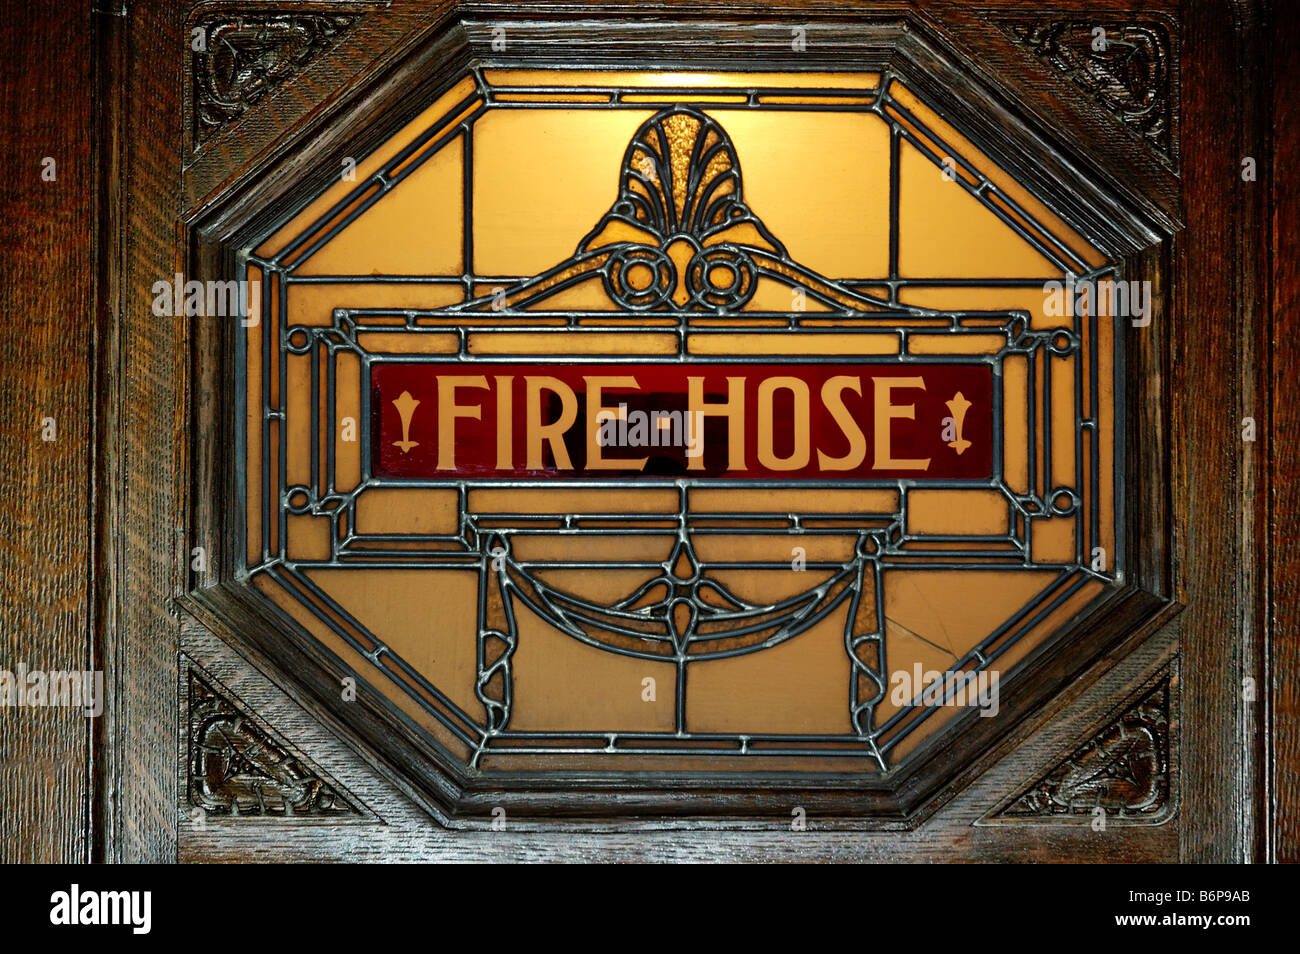 A stained glass window for a fire hose art deco style Stock Photo